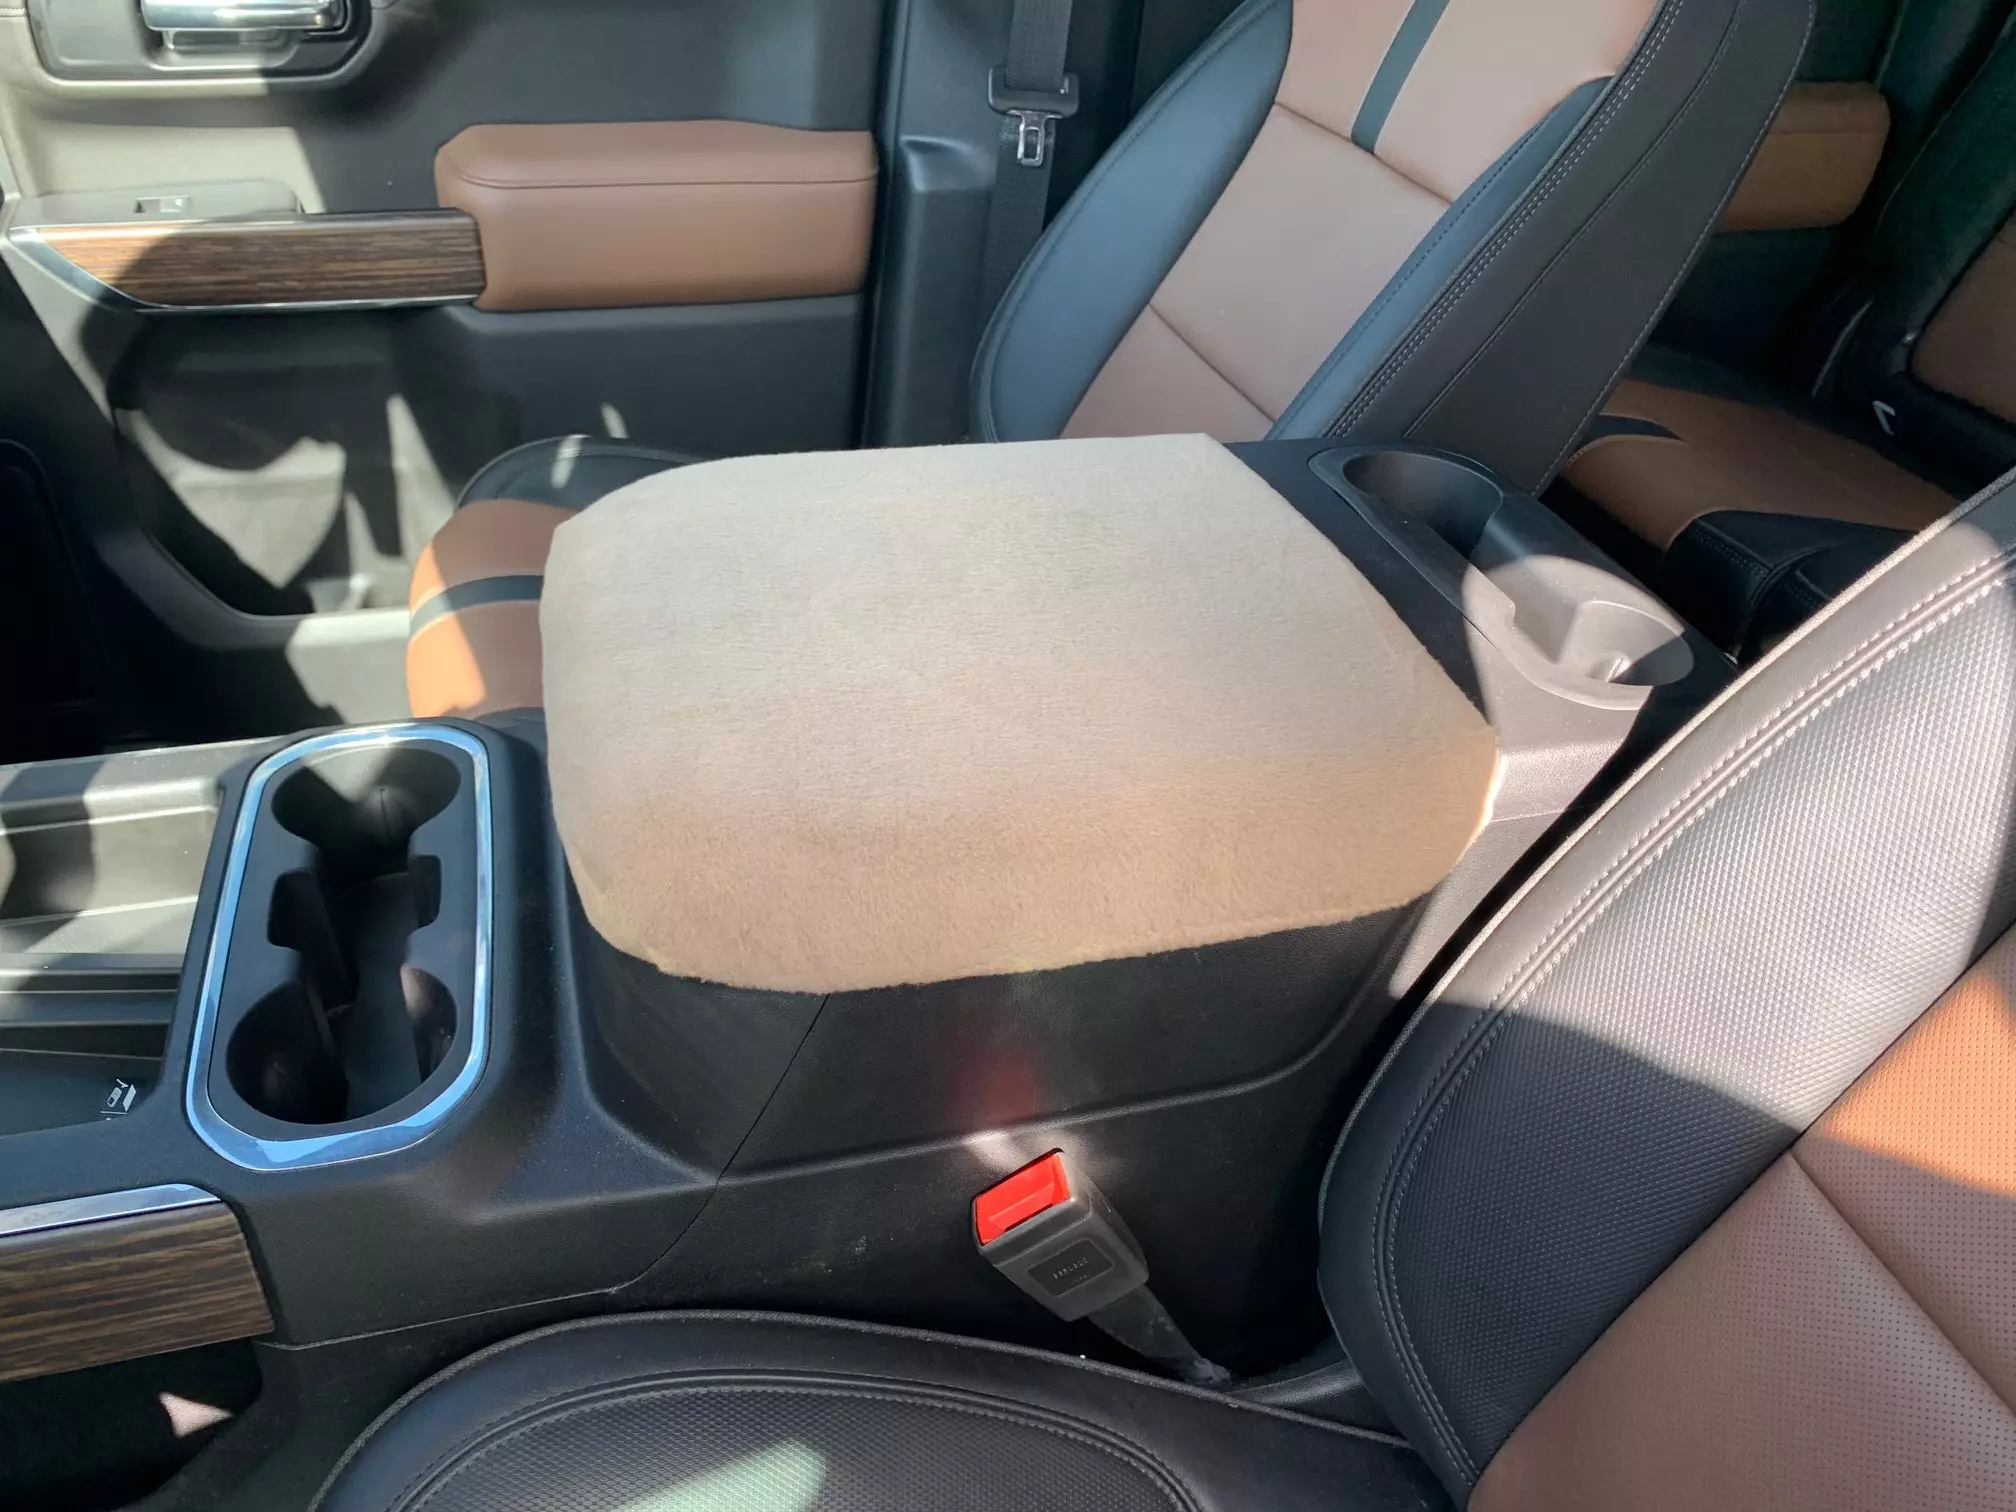 Buy Fleece Center Console Armrest Cover fits the 2019-2022 Chevy Silverado ( All Models & Trim Levels with True Center Console)